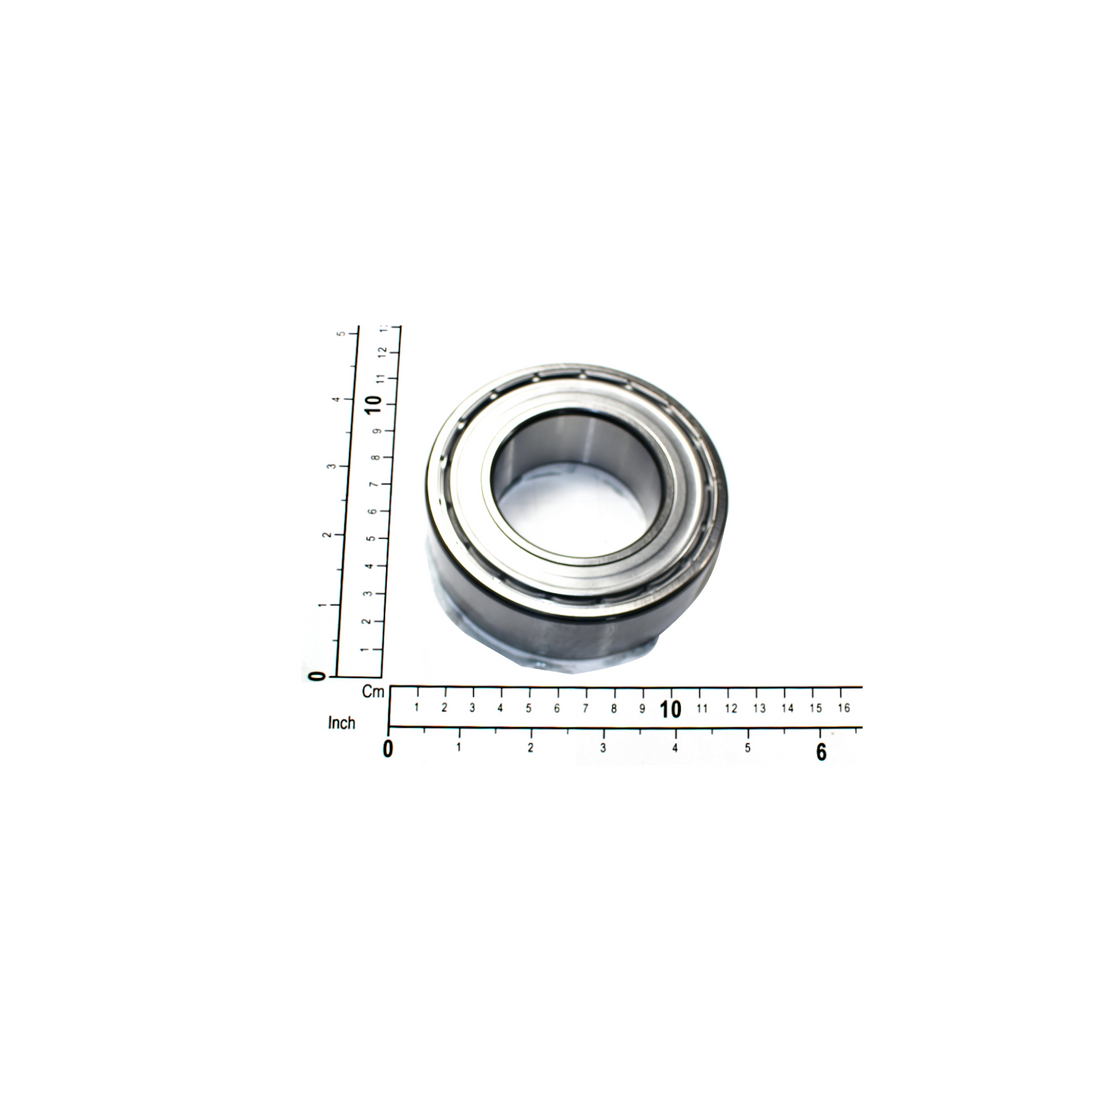 R&M Parts - Bearing, Part Number: 6300832121